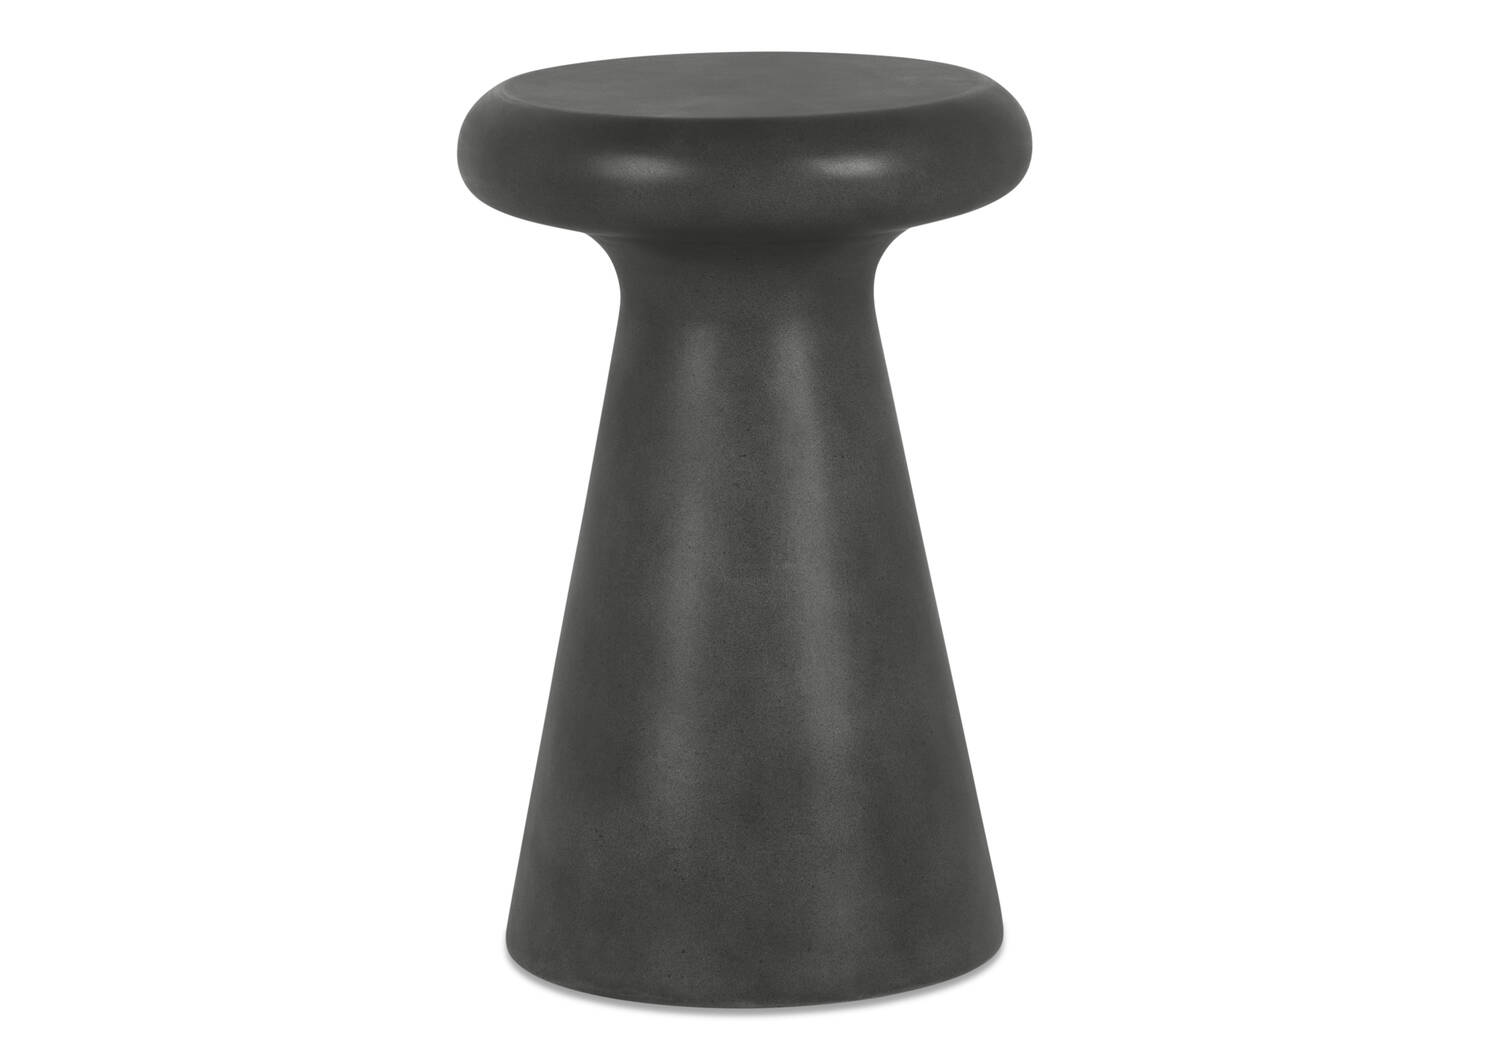 Farlind Short Accent Table -Charcoal